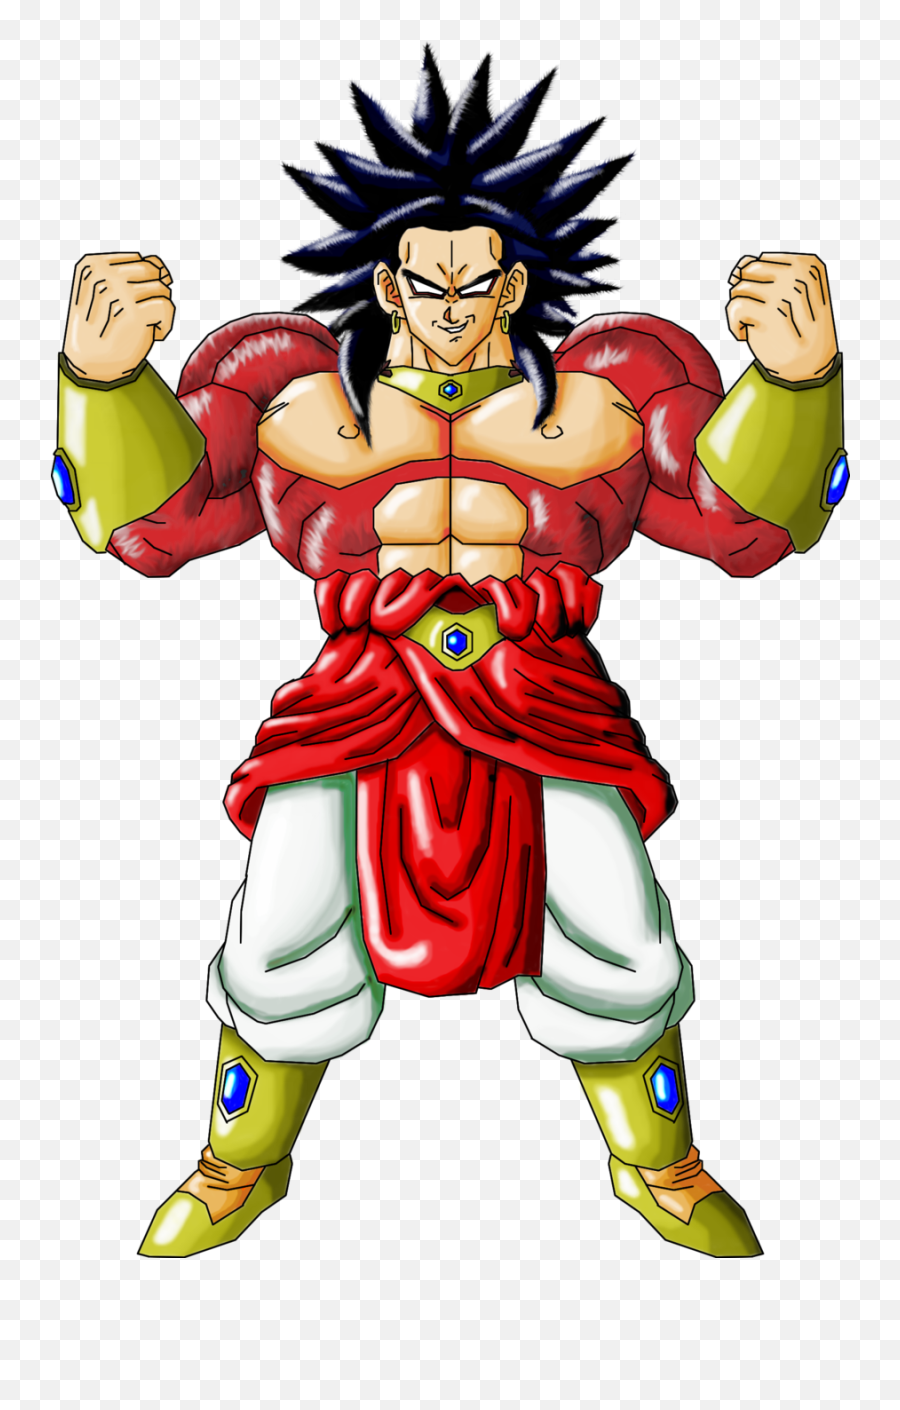 Broly 17 - Monkey D Luffy Png Full Size Png Download Seekpng Monkey D Luffy Png,Monkey D Luffy Png